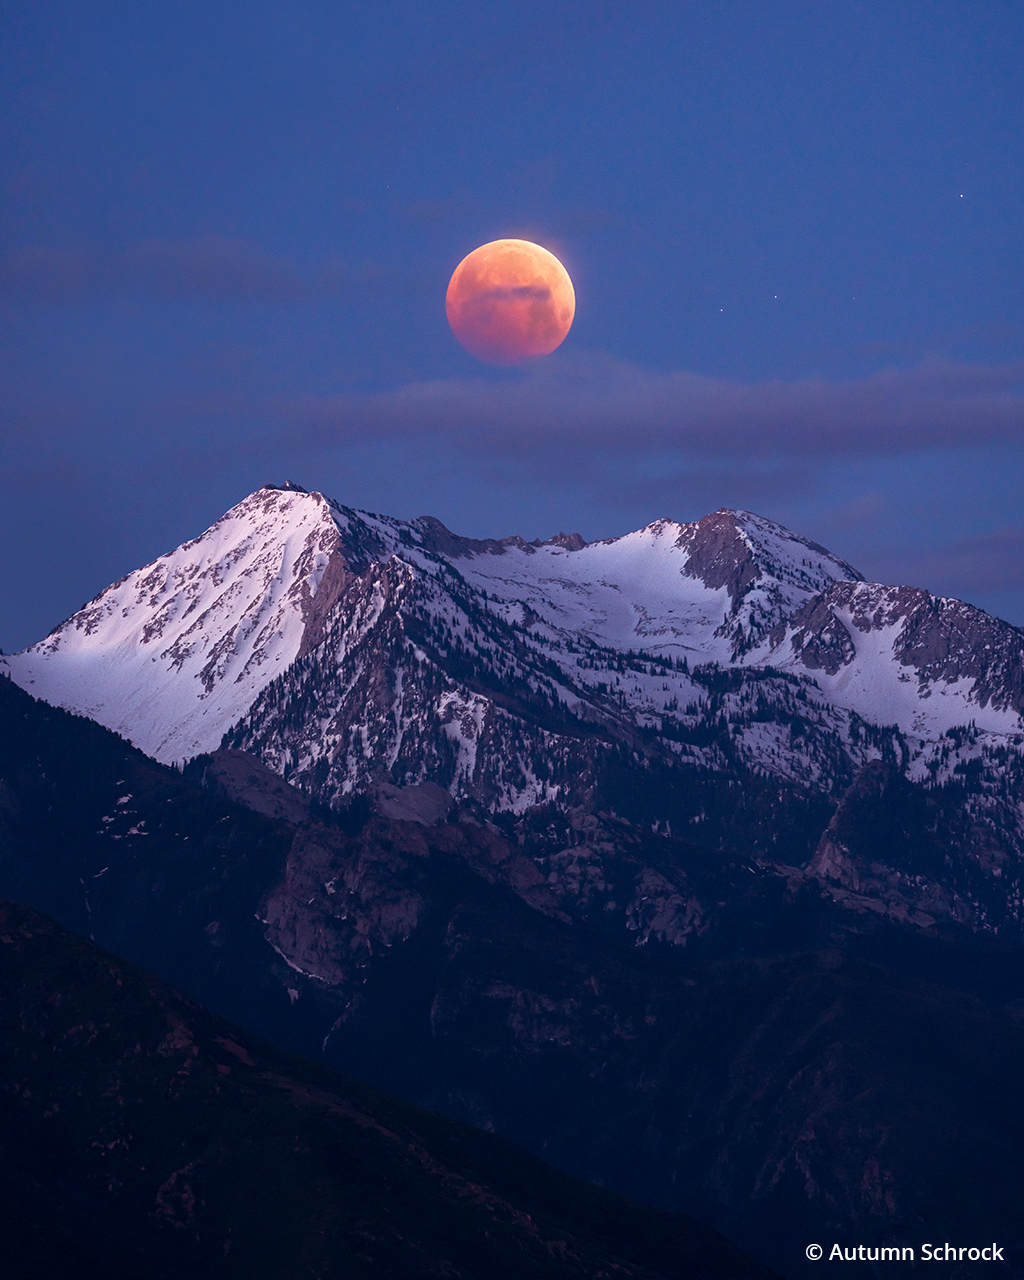 Photograph of the moon during a lunar eclipse event.